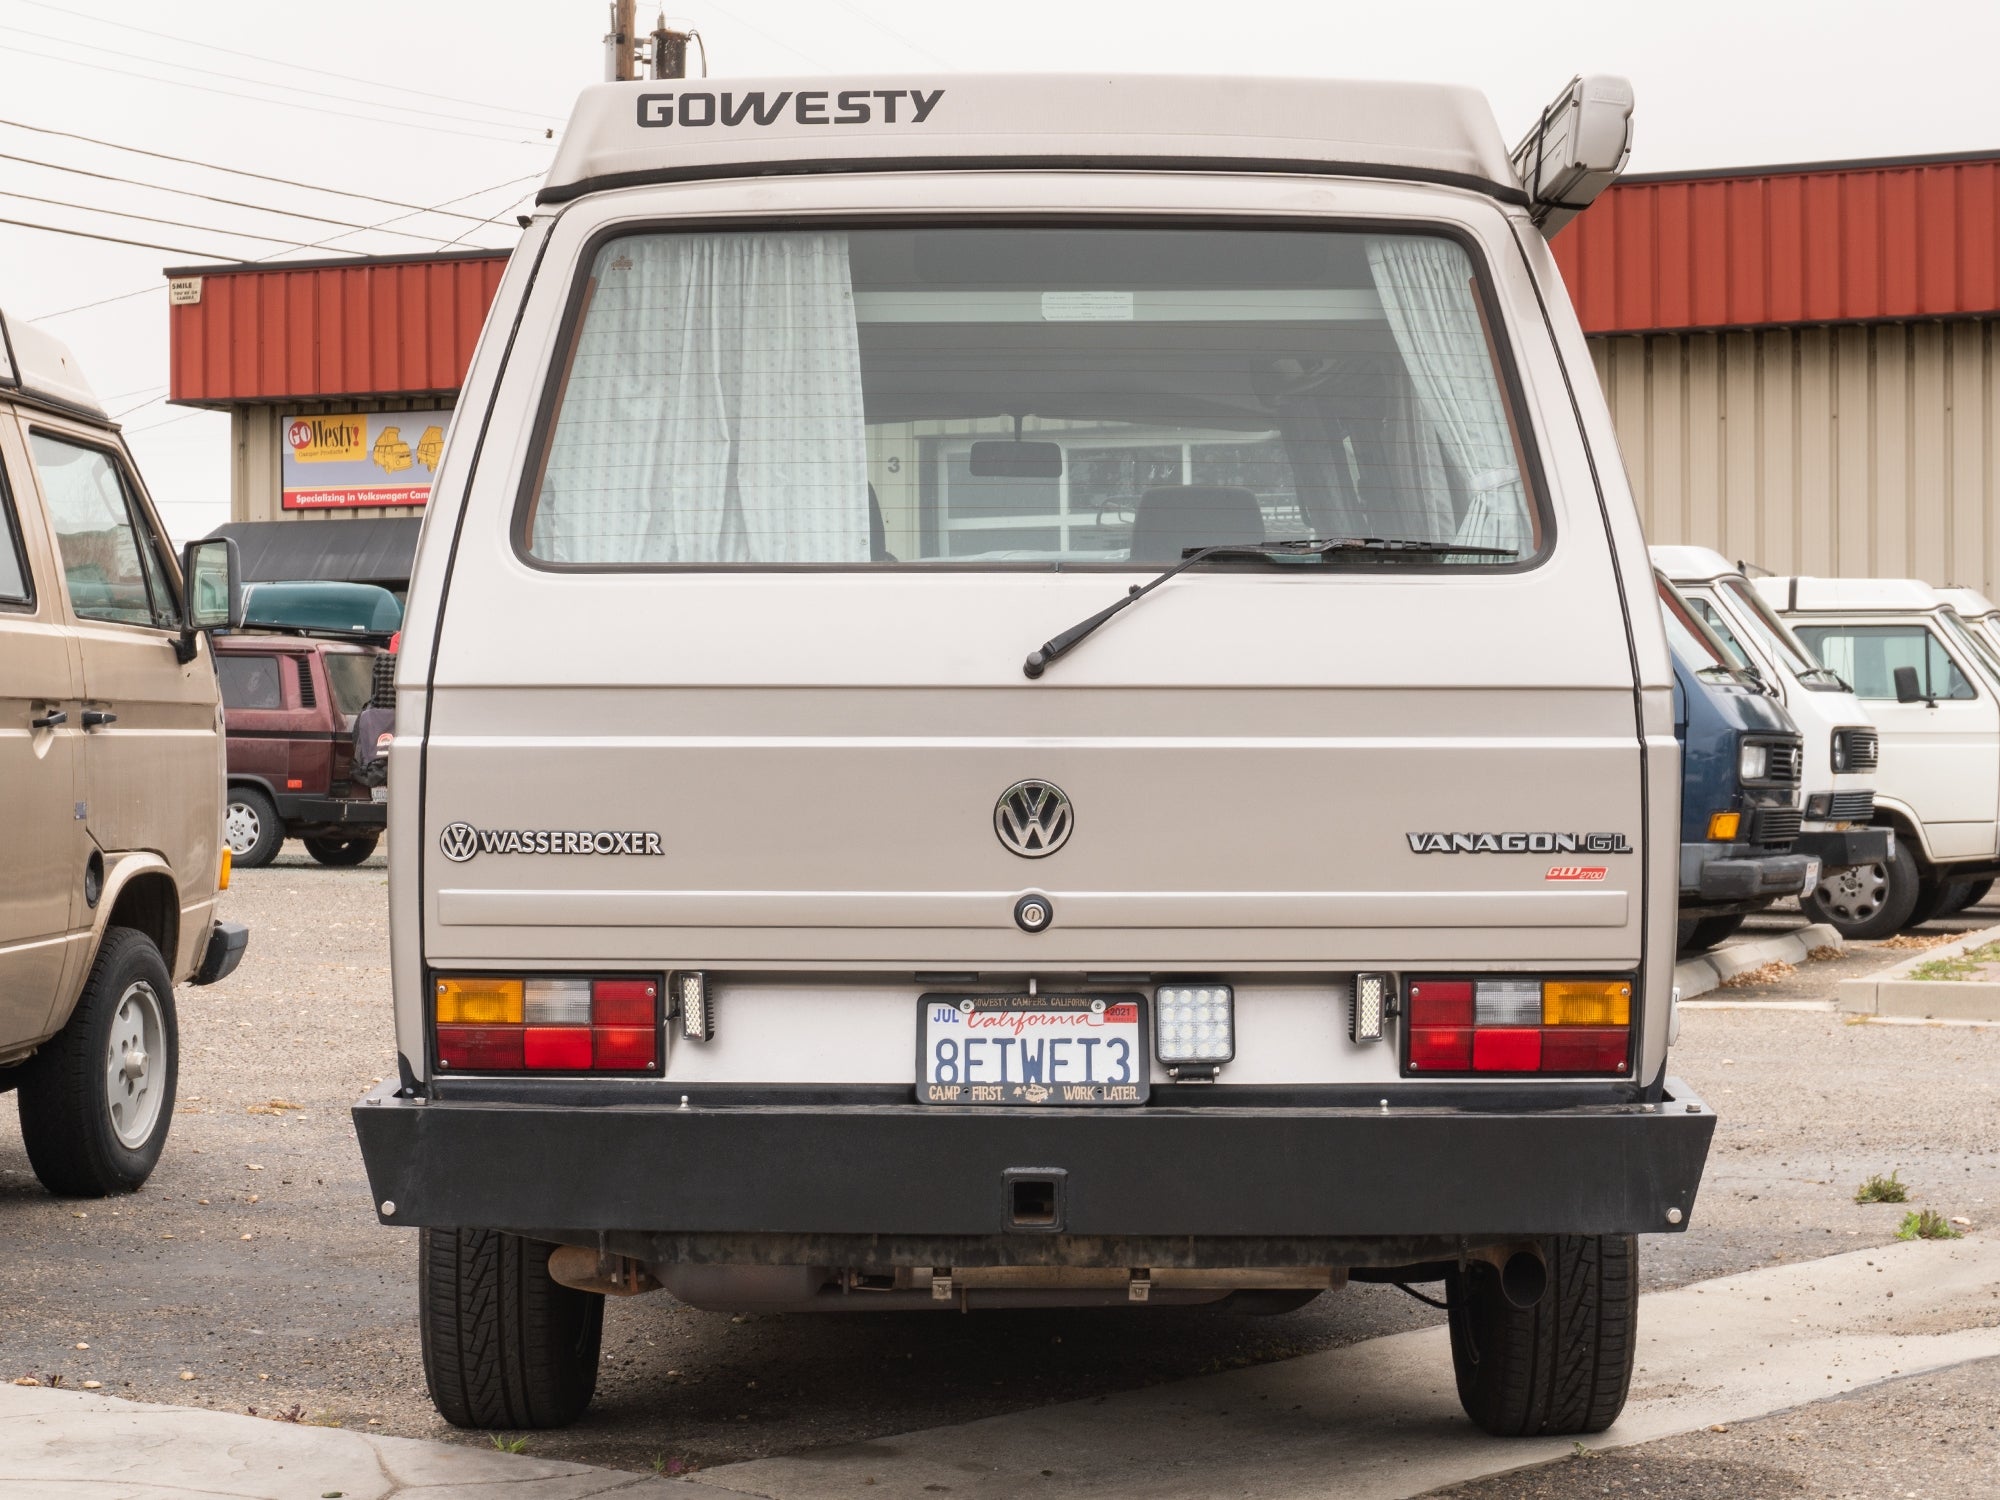 South african grille emblem – GoWesty